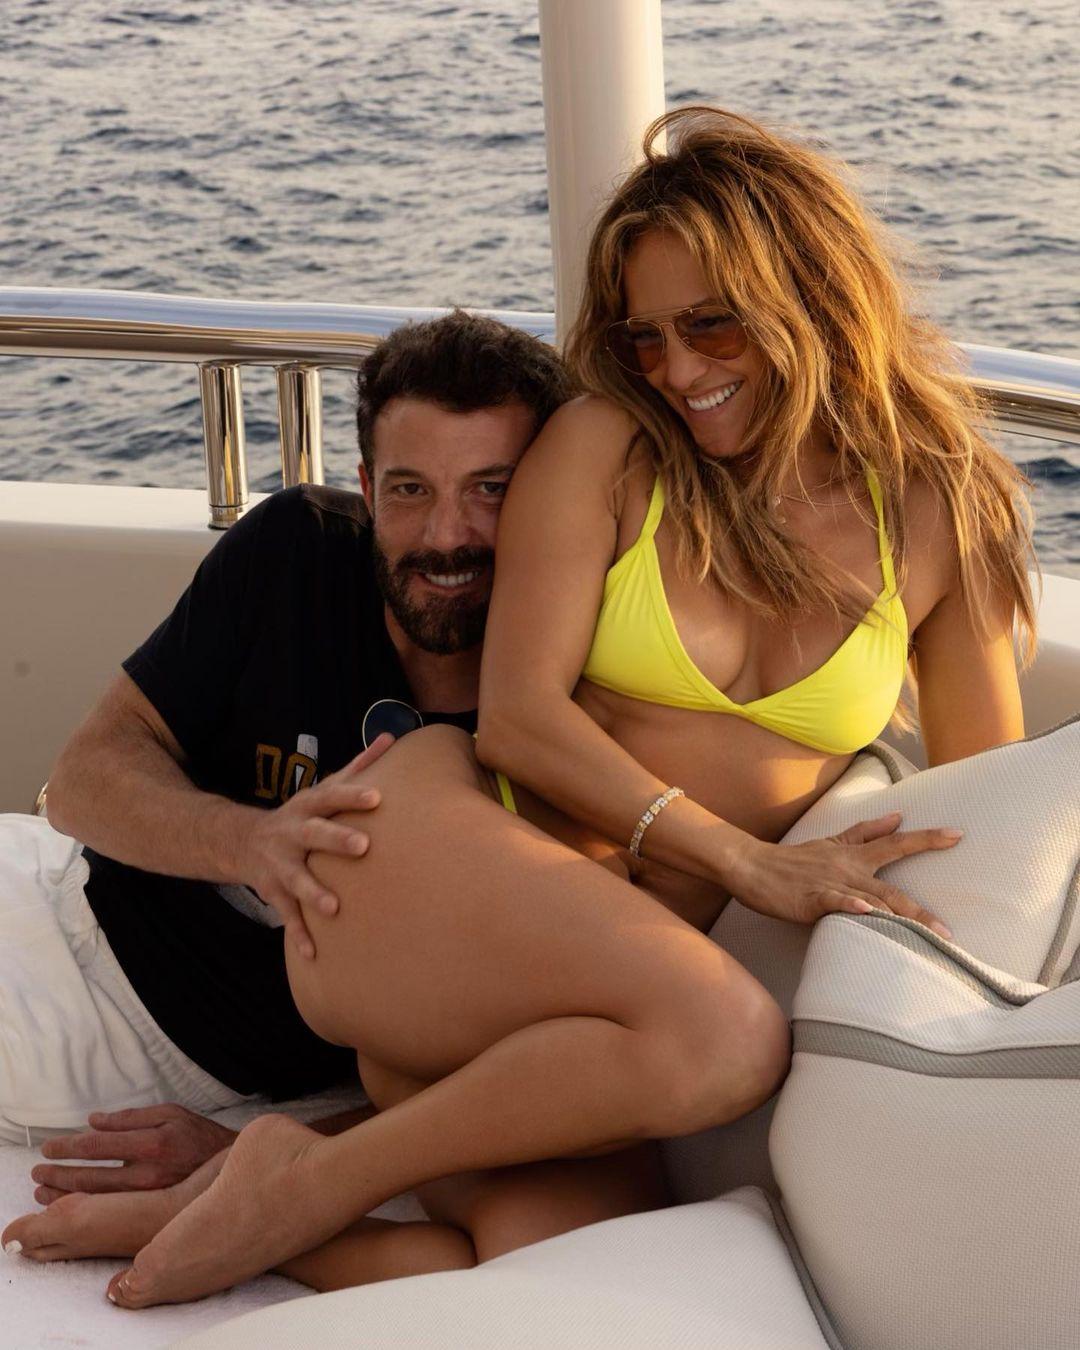 Jennifer Lopez And Ben Affleck Reveal Special Tattoo To Emphasize Their Love For Each Other